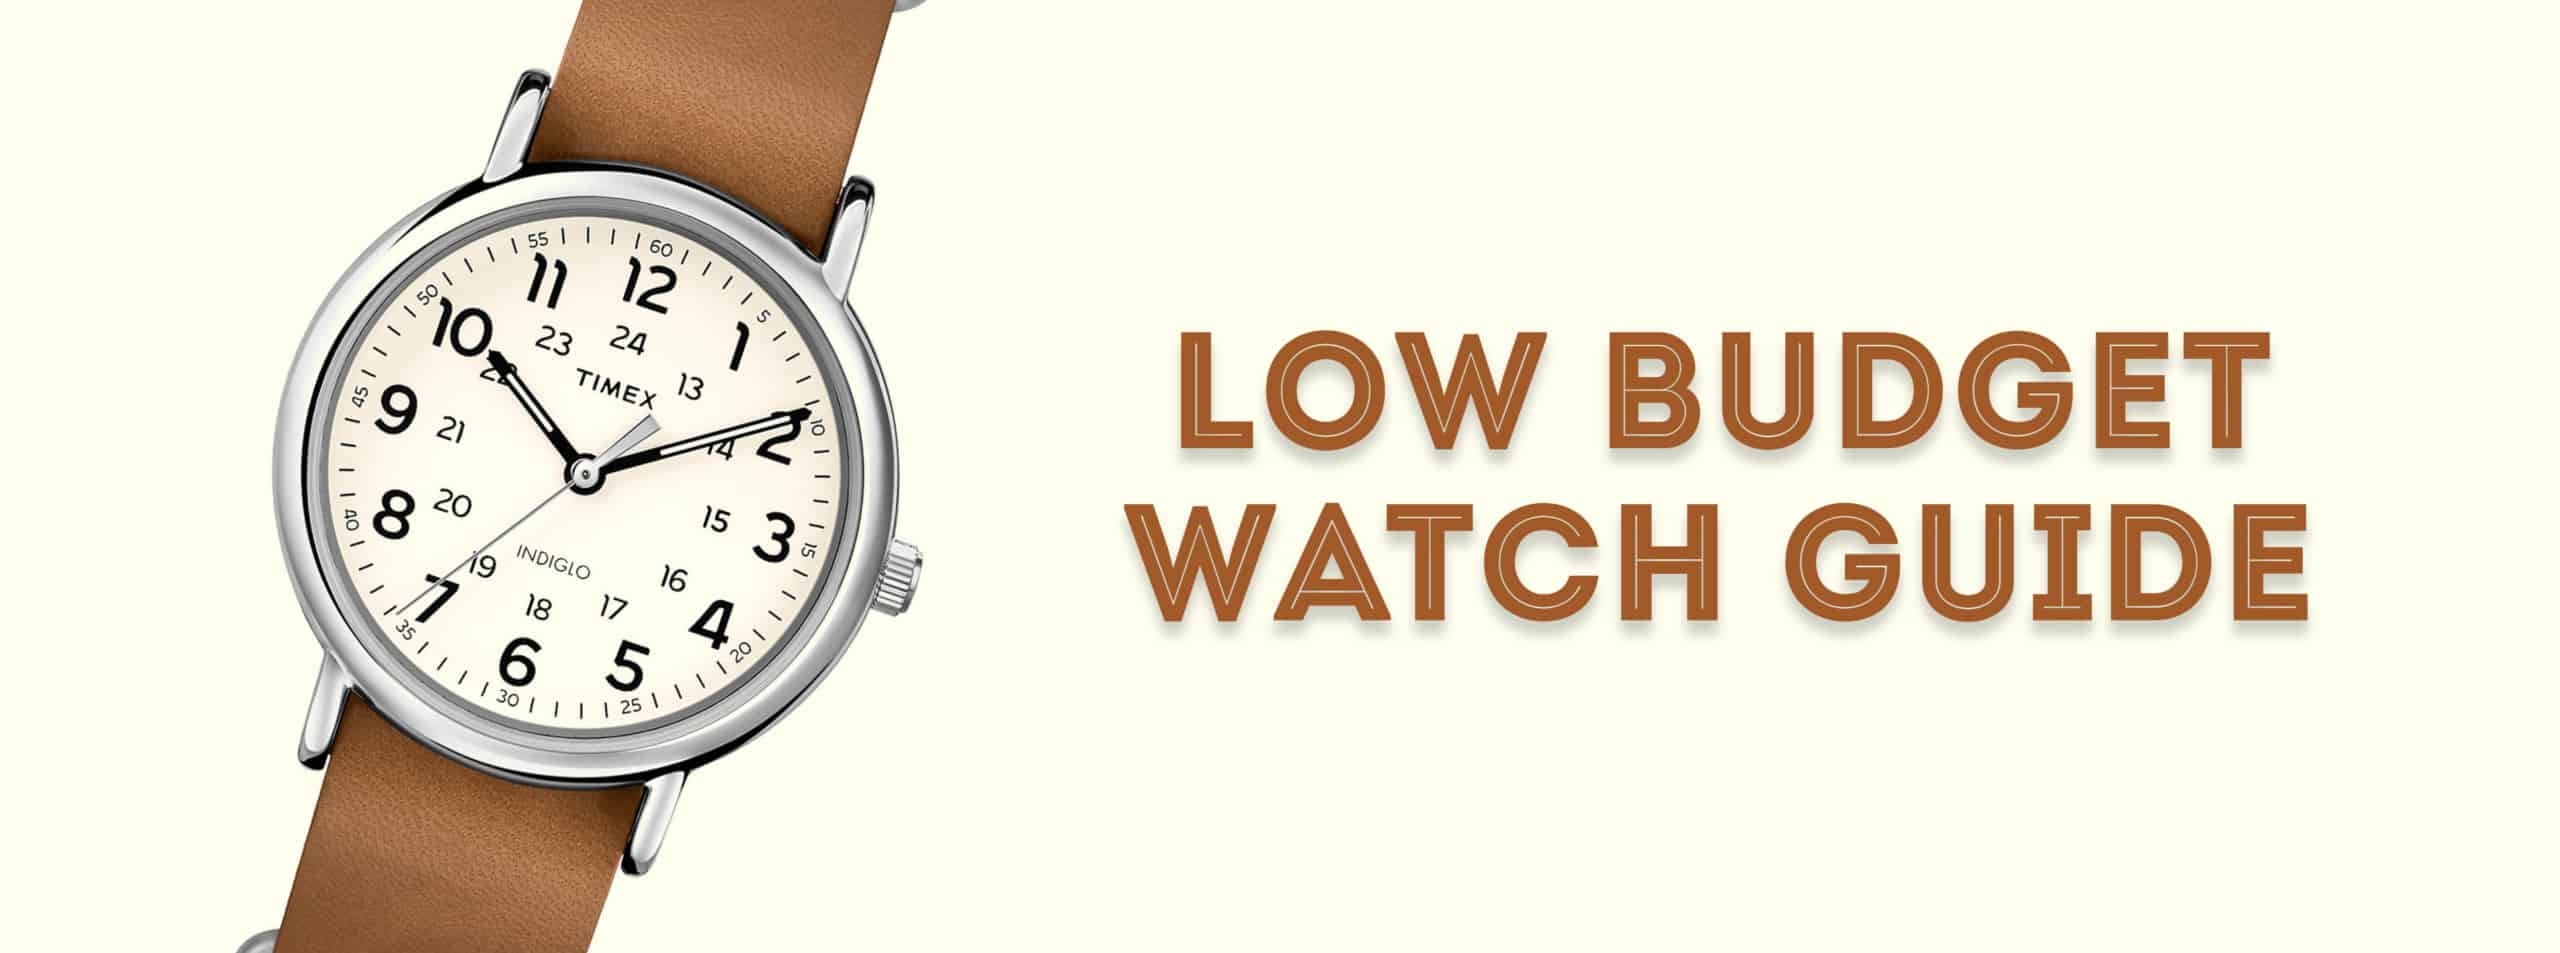 low budget watch guide 3870x1440 scaled